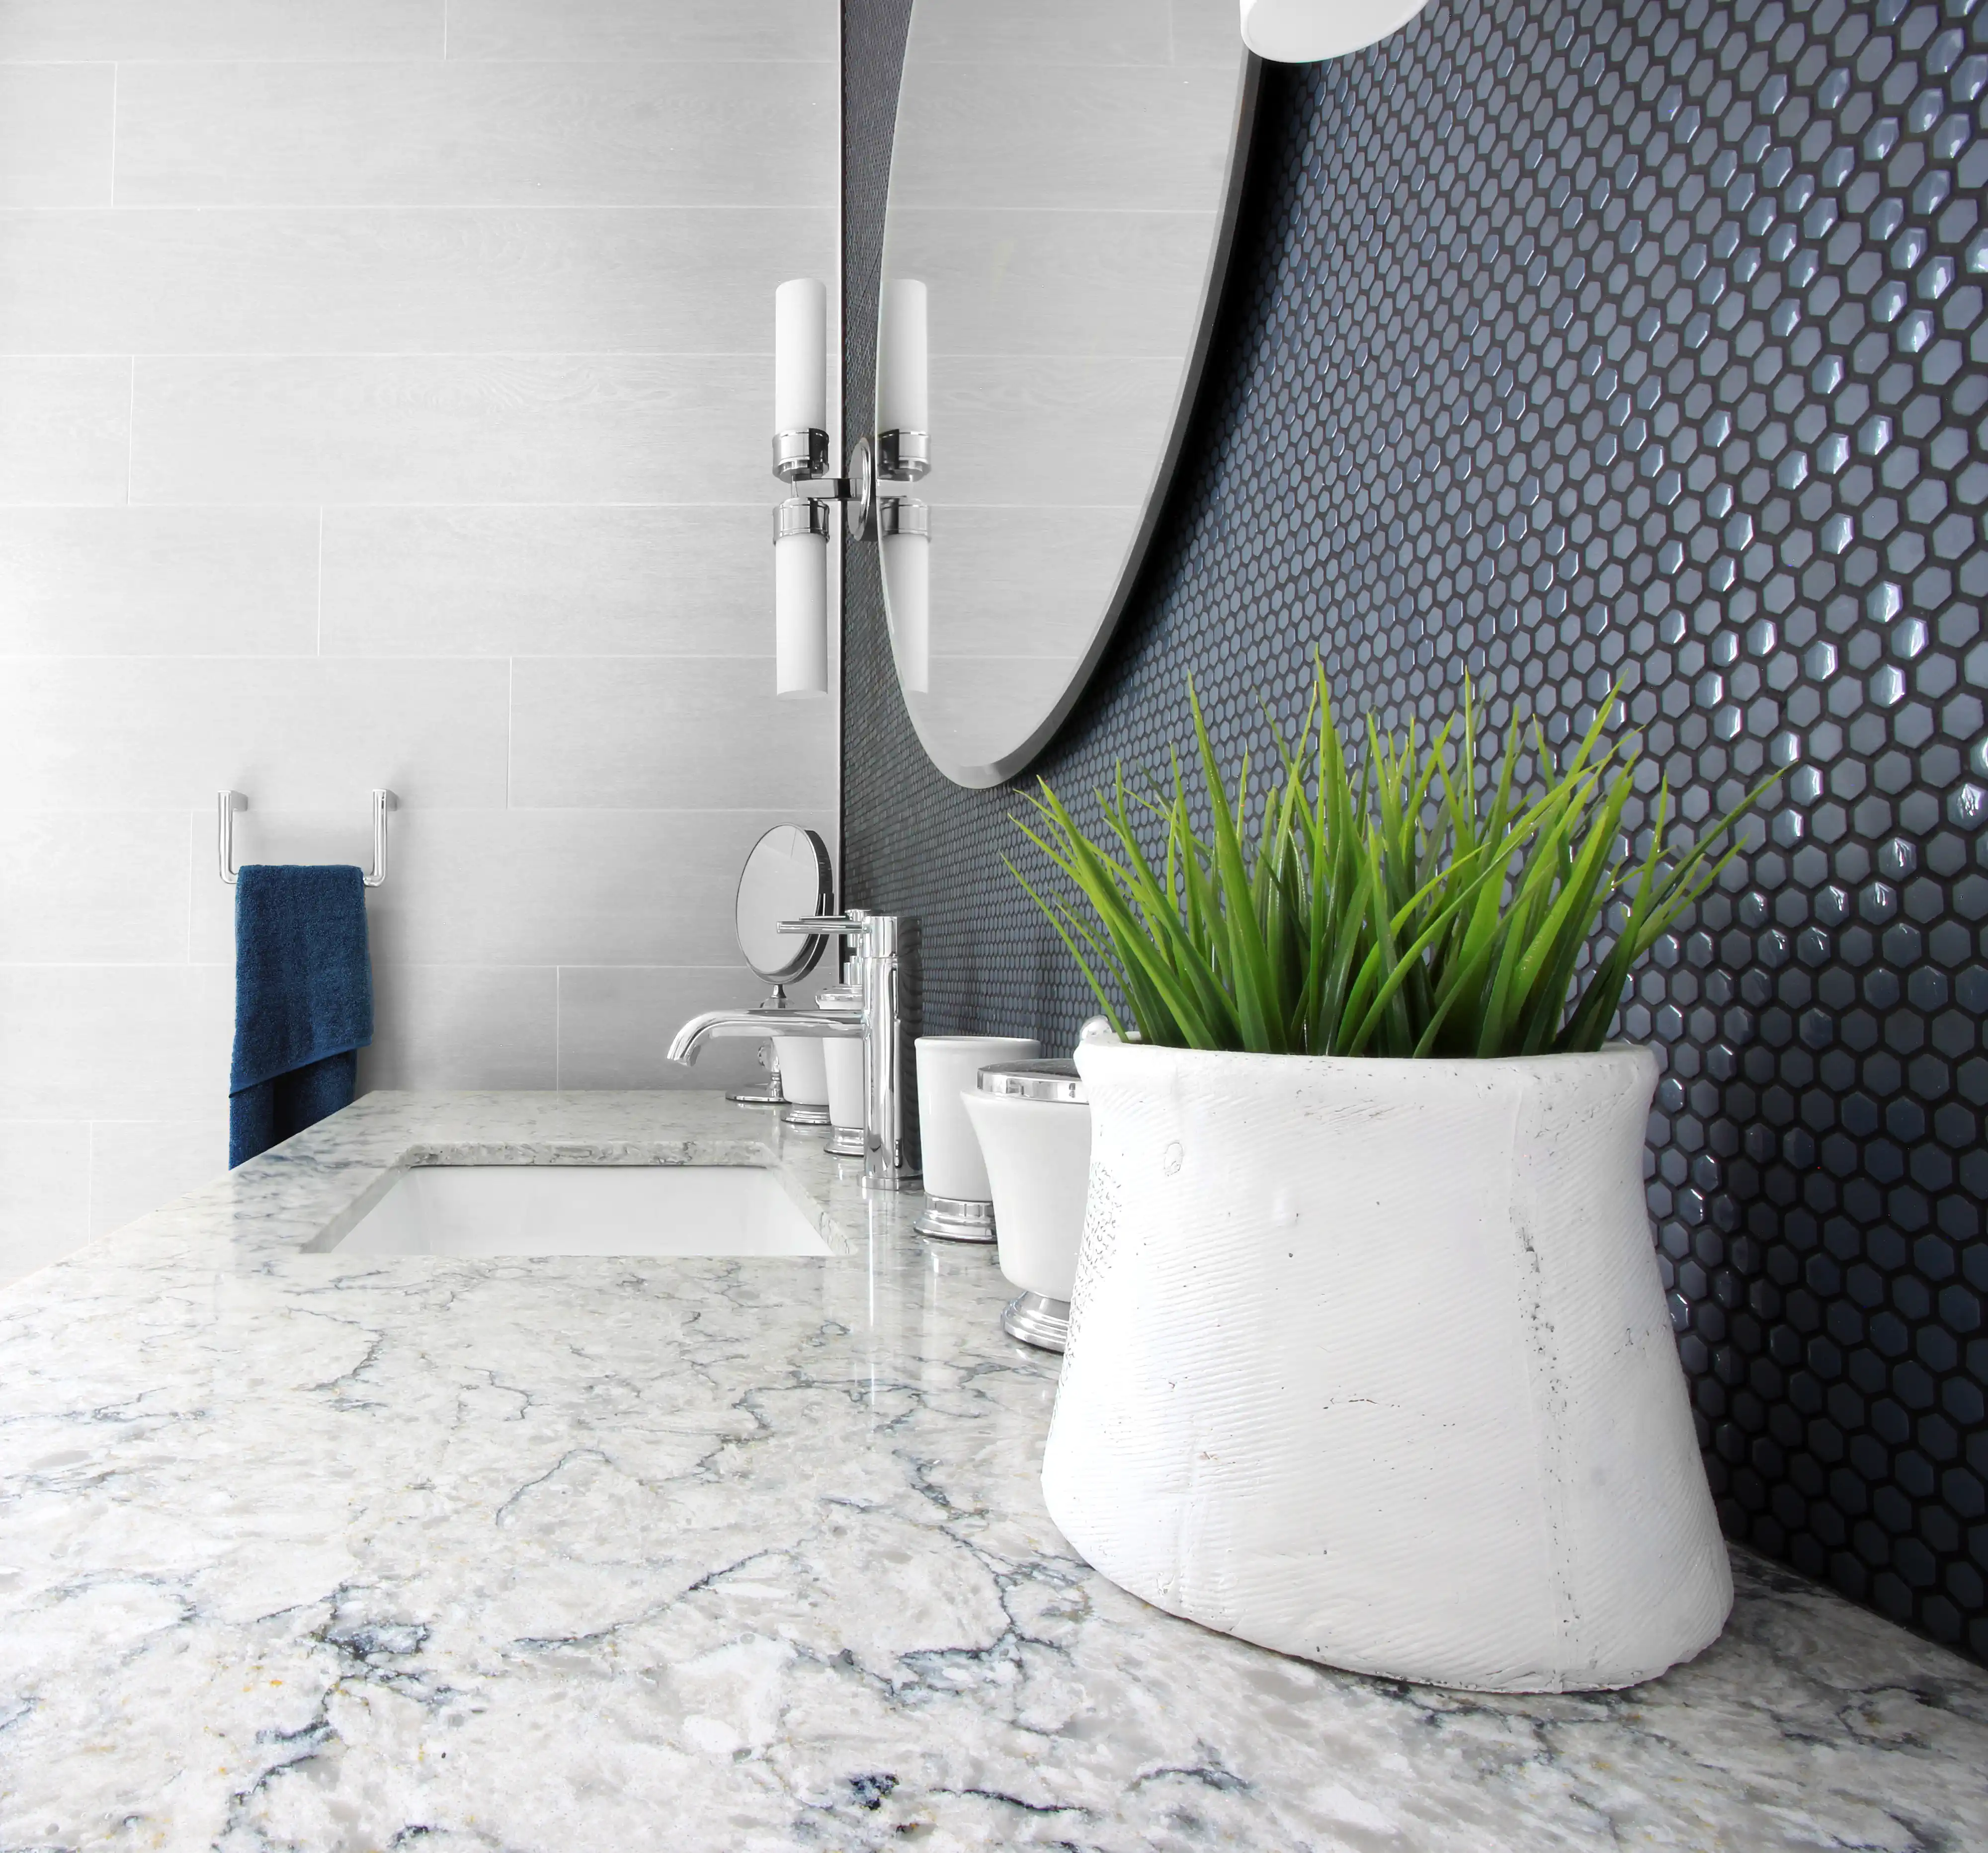 A modern bathroom sink and countertop with white marble and dark blue hexagonal tiles, interior by Sarah Brown Design